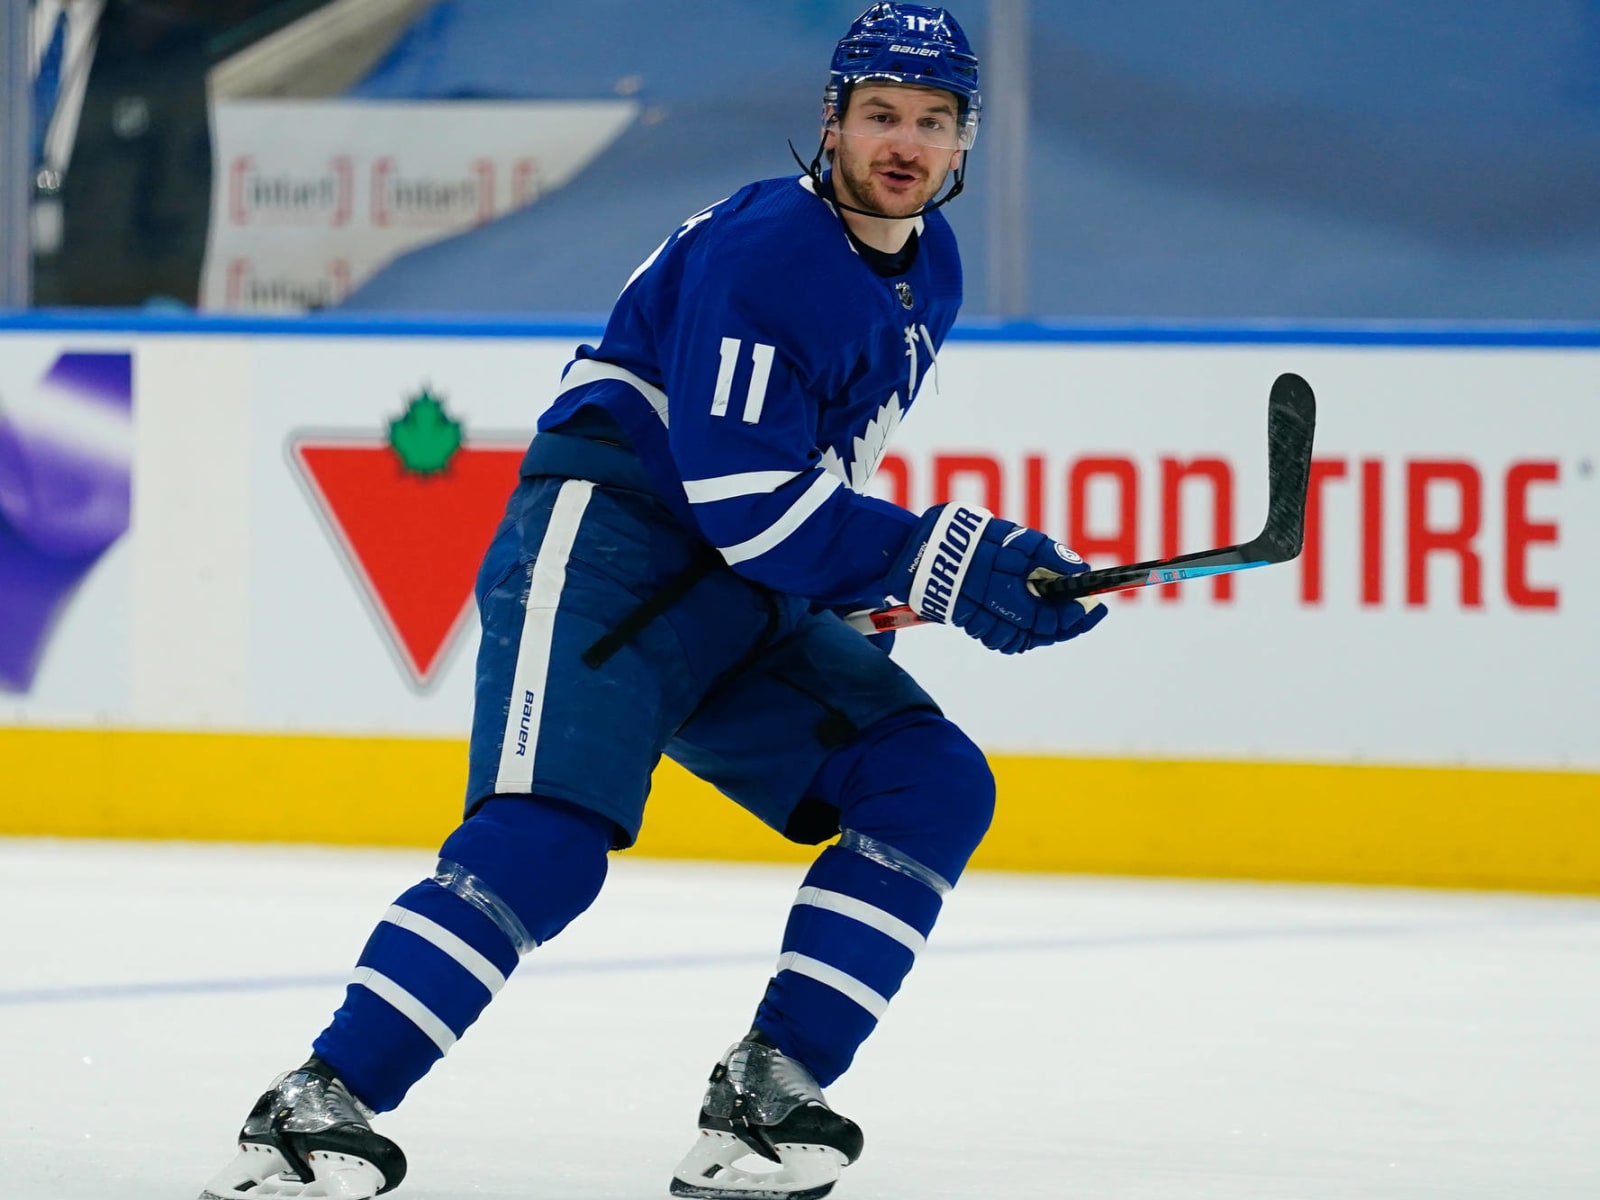 Toronto Maple Leafs: Re-signing Zach Hyman should be a priority